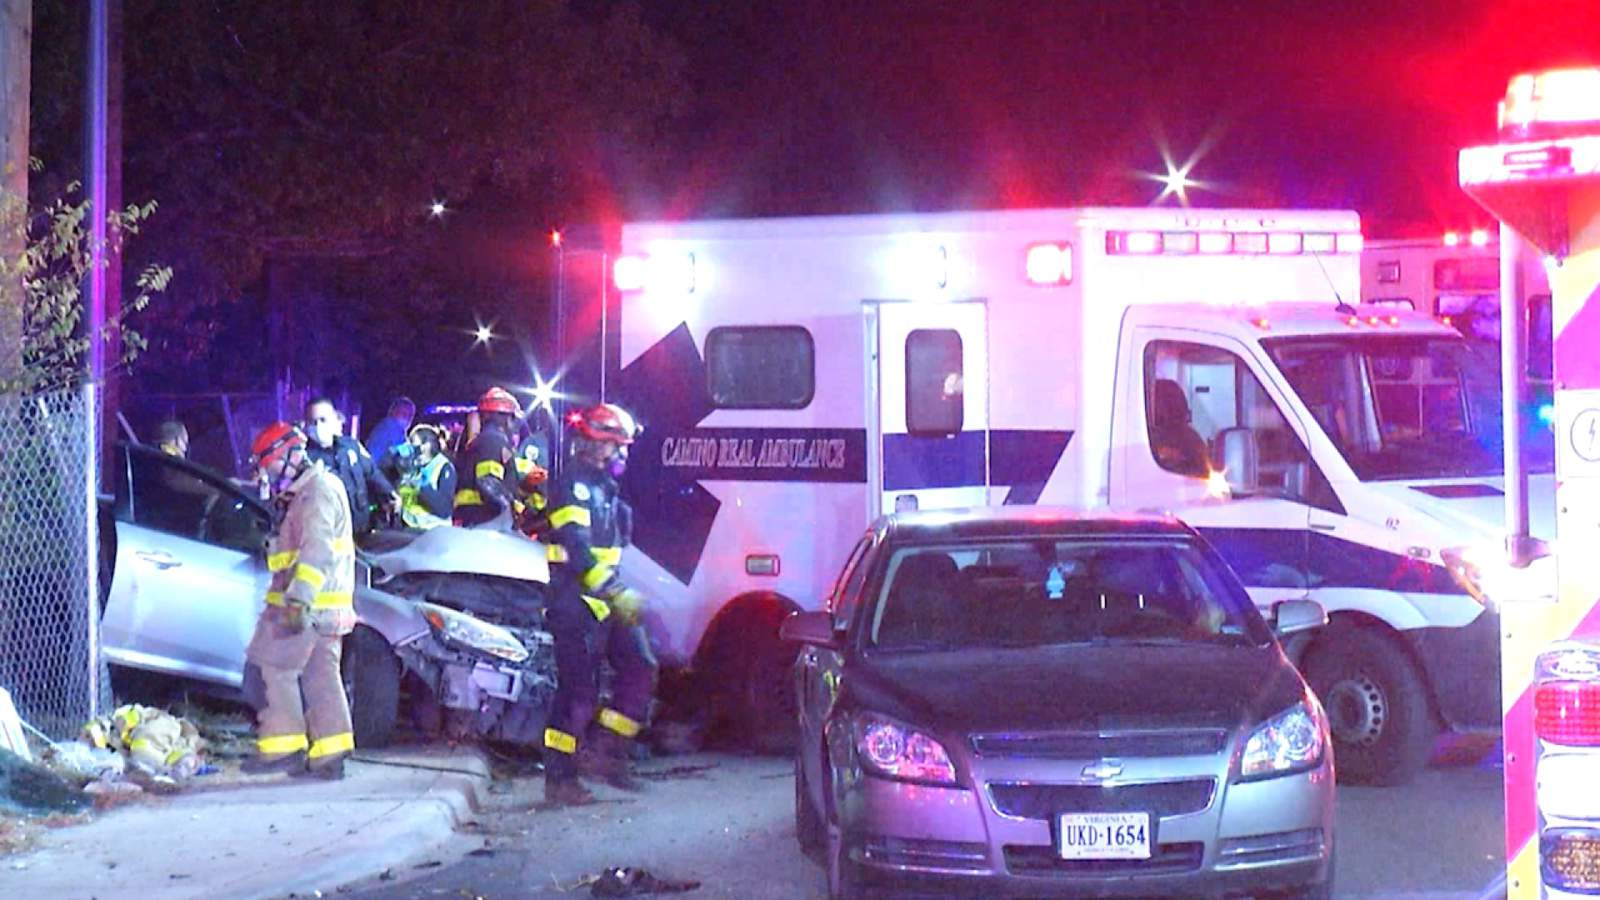 Driver pinned inside car during crash with ambulance, police say